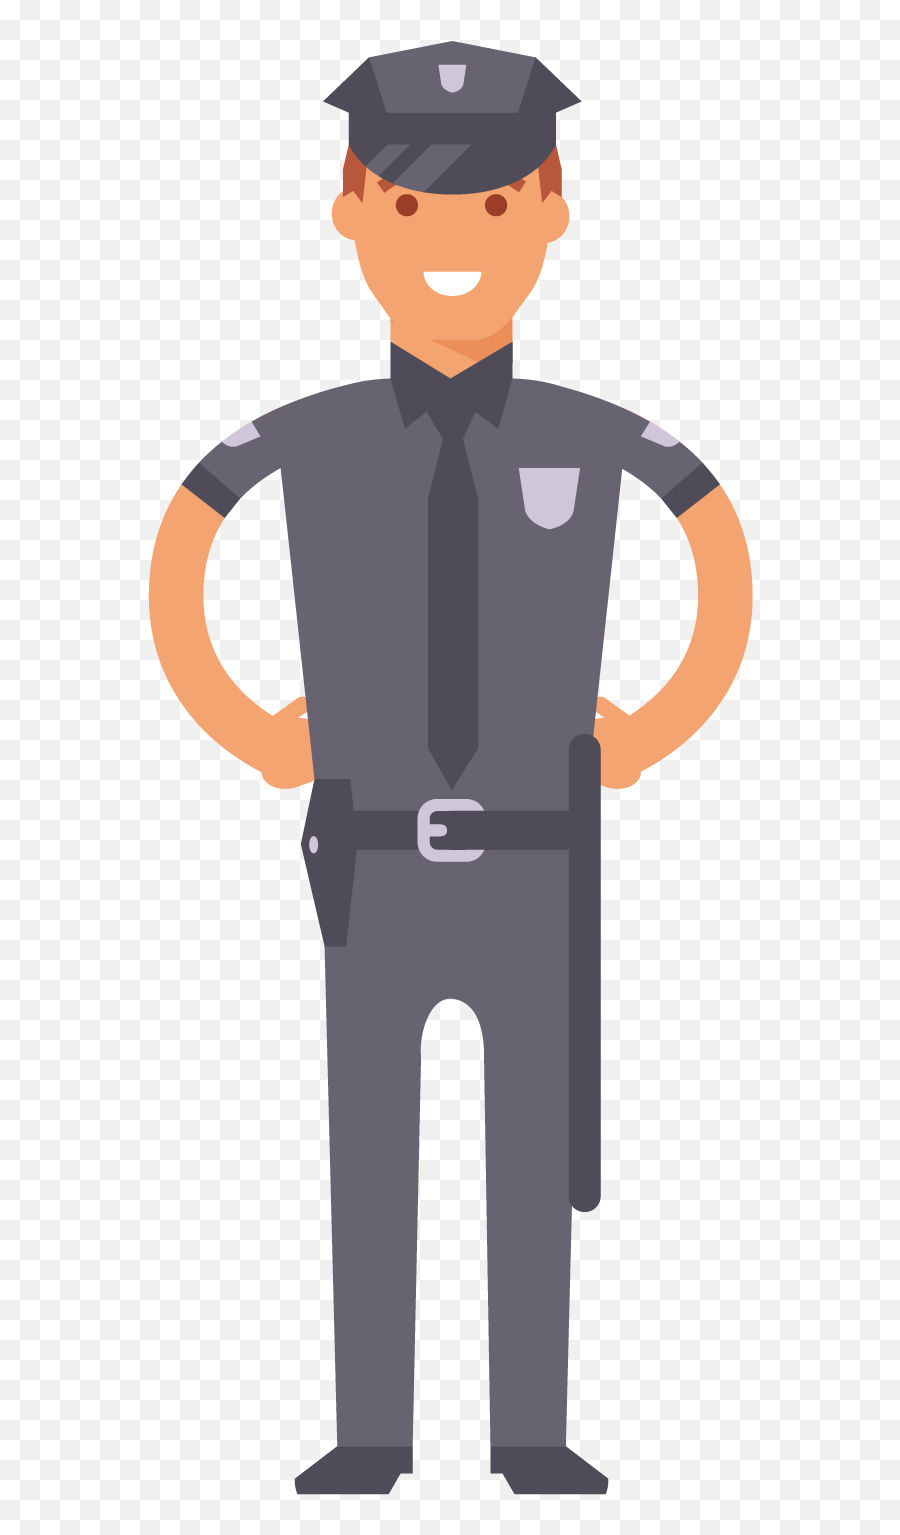 Png Images Pngs Policeman Police